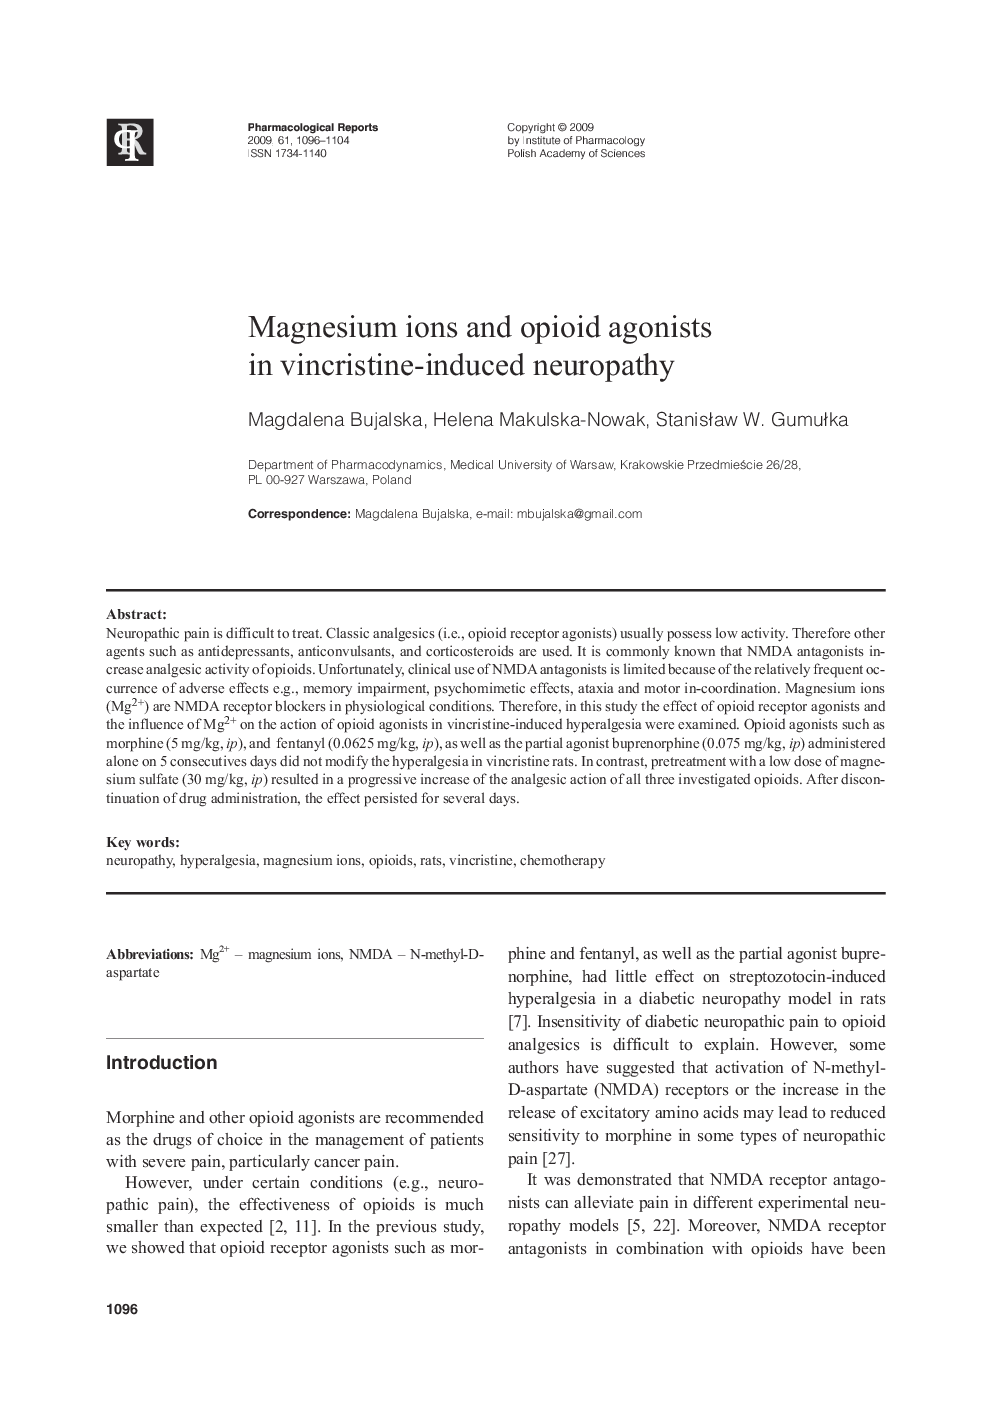 Magnesium ions and opioid agonists in vincristine-induced neuropathy